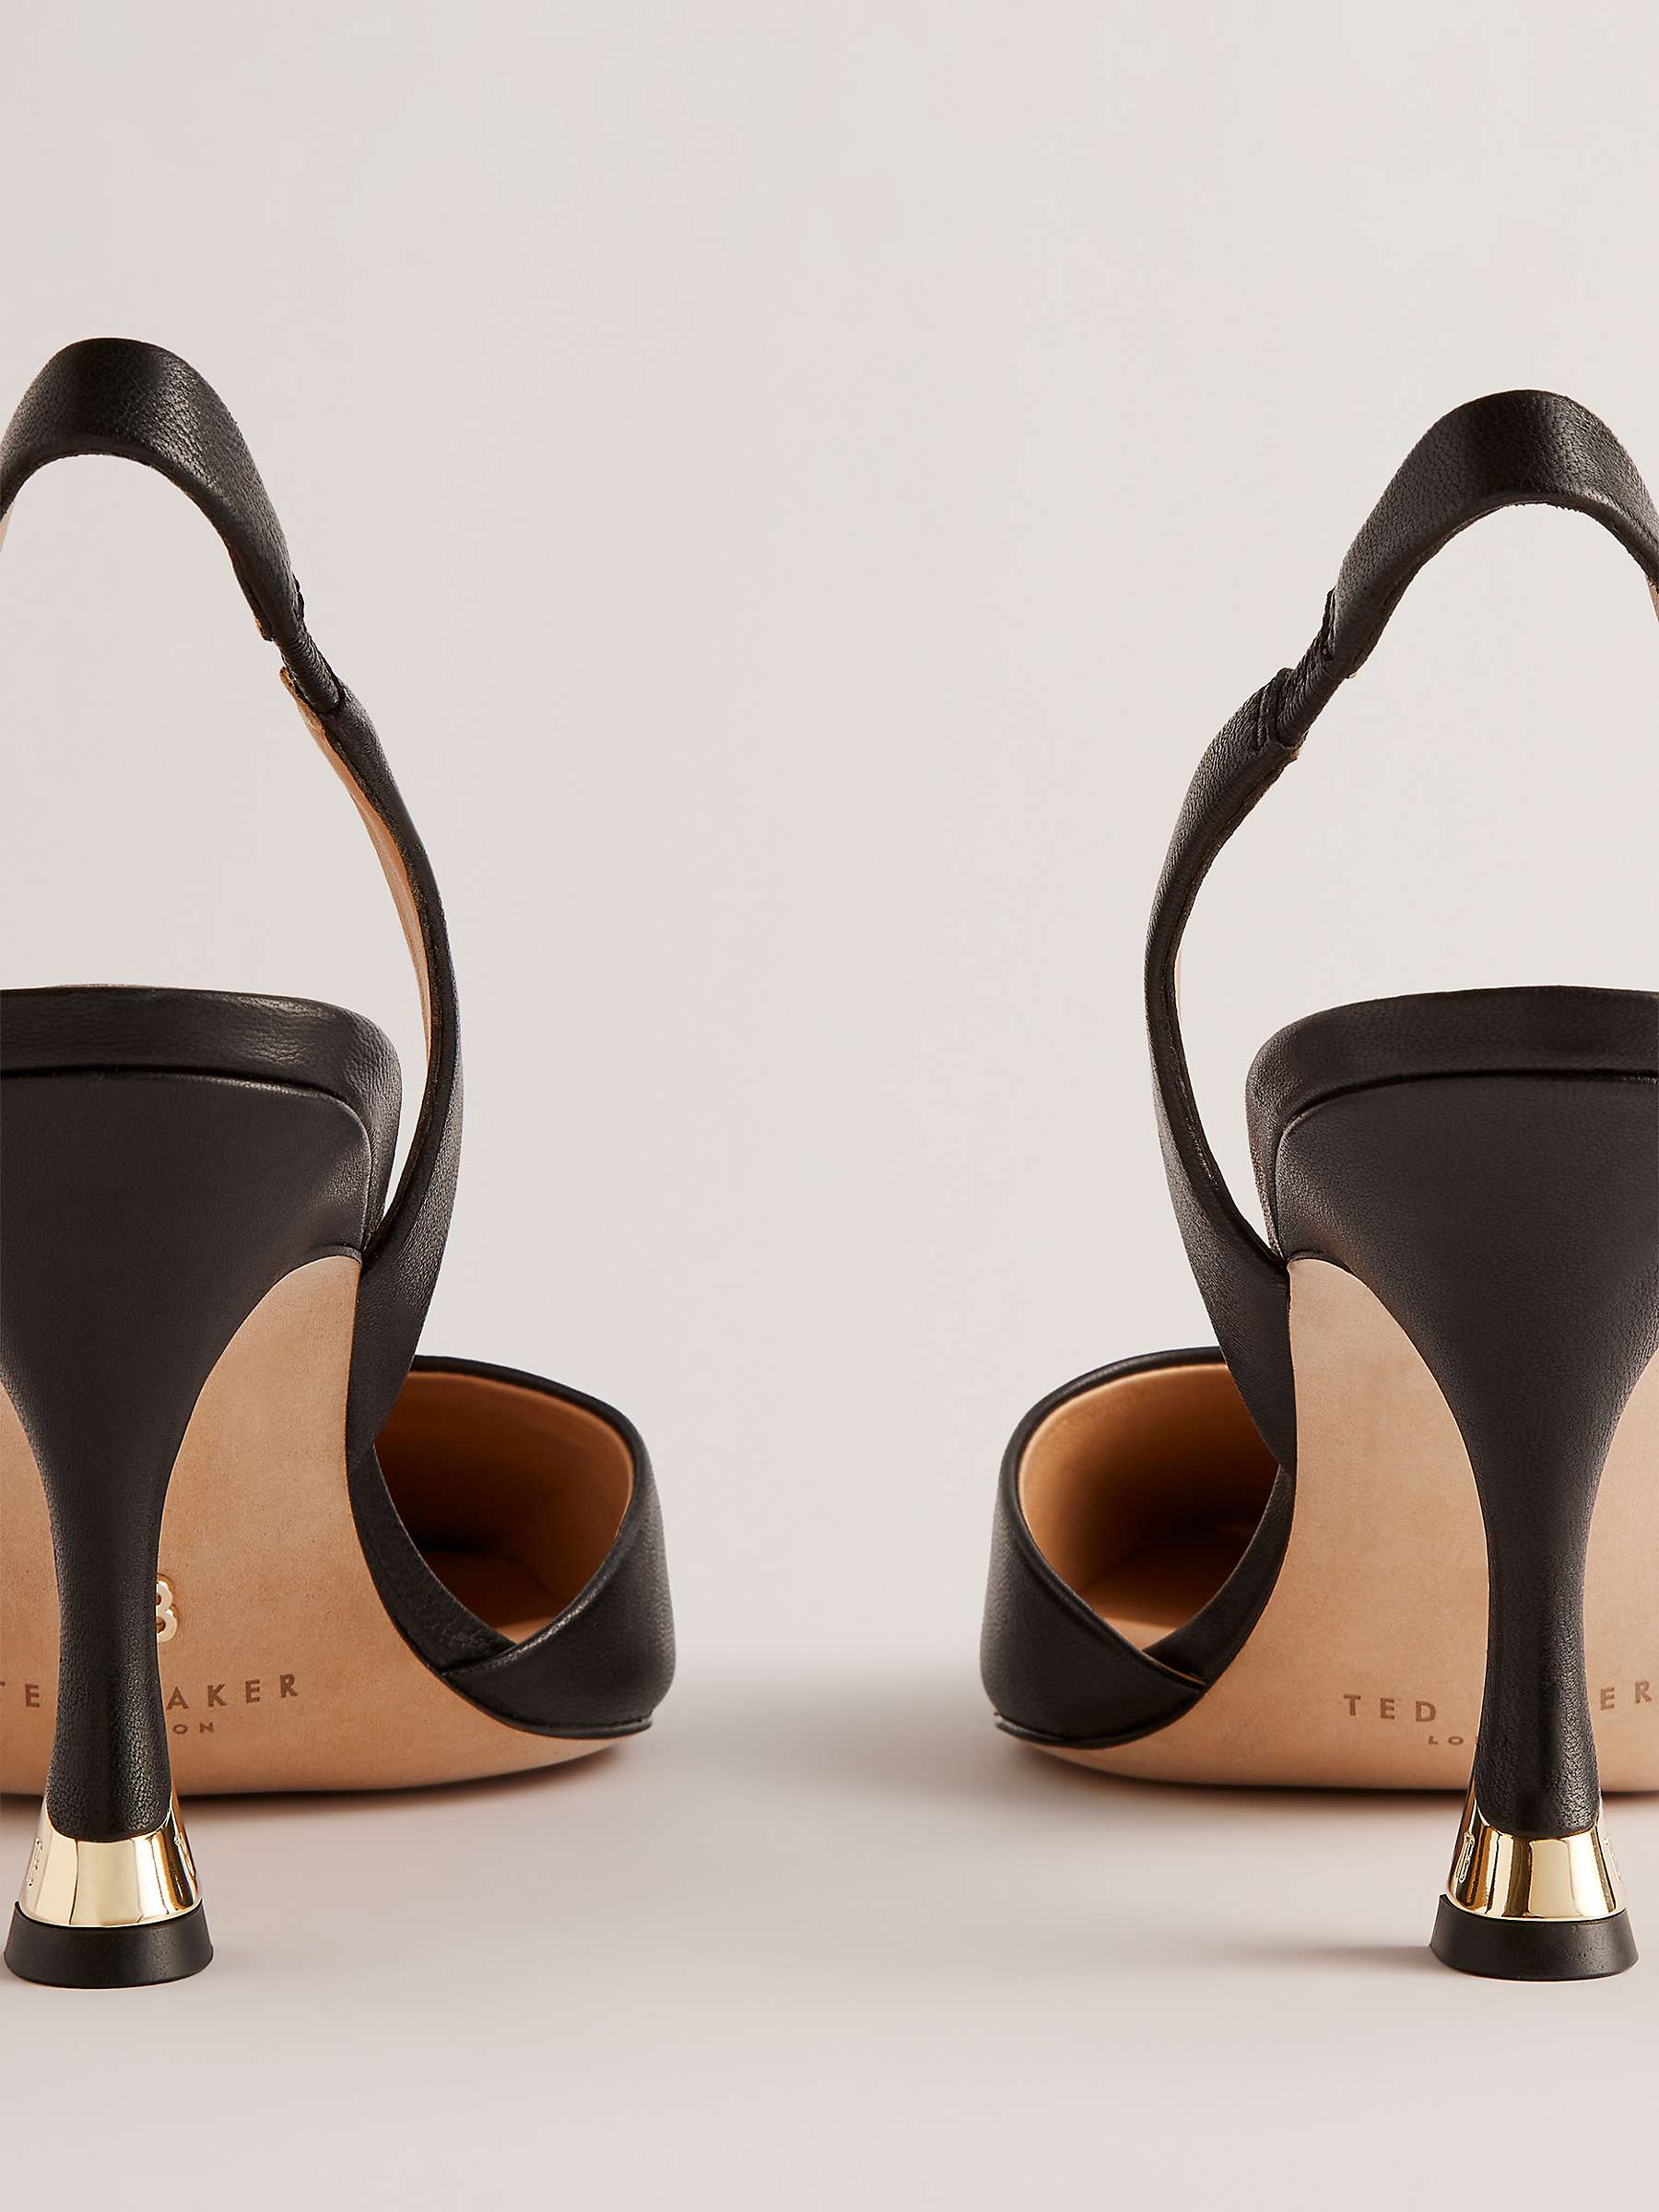 Buy Ted Baker Ariii Slingback Leather Court Shoes Online at johnlewis.com